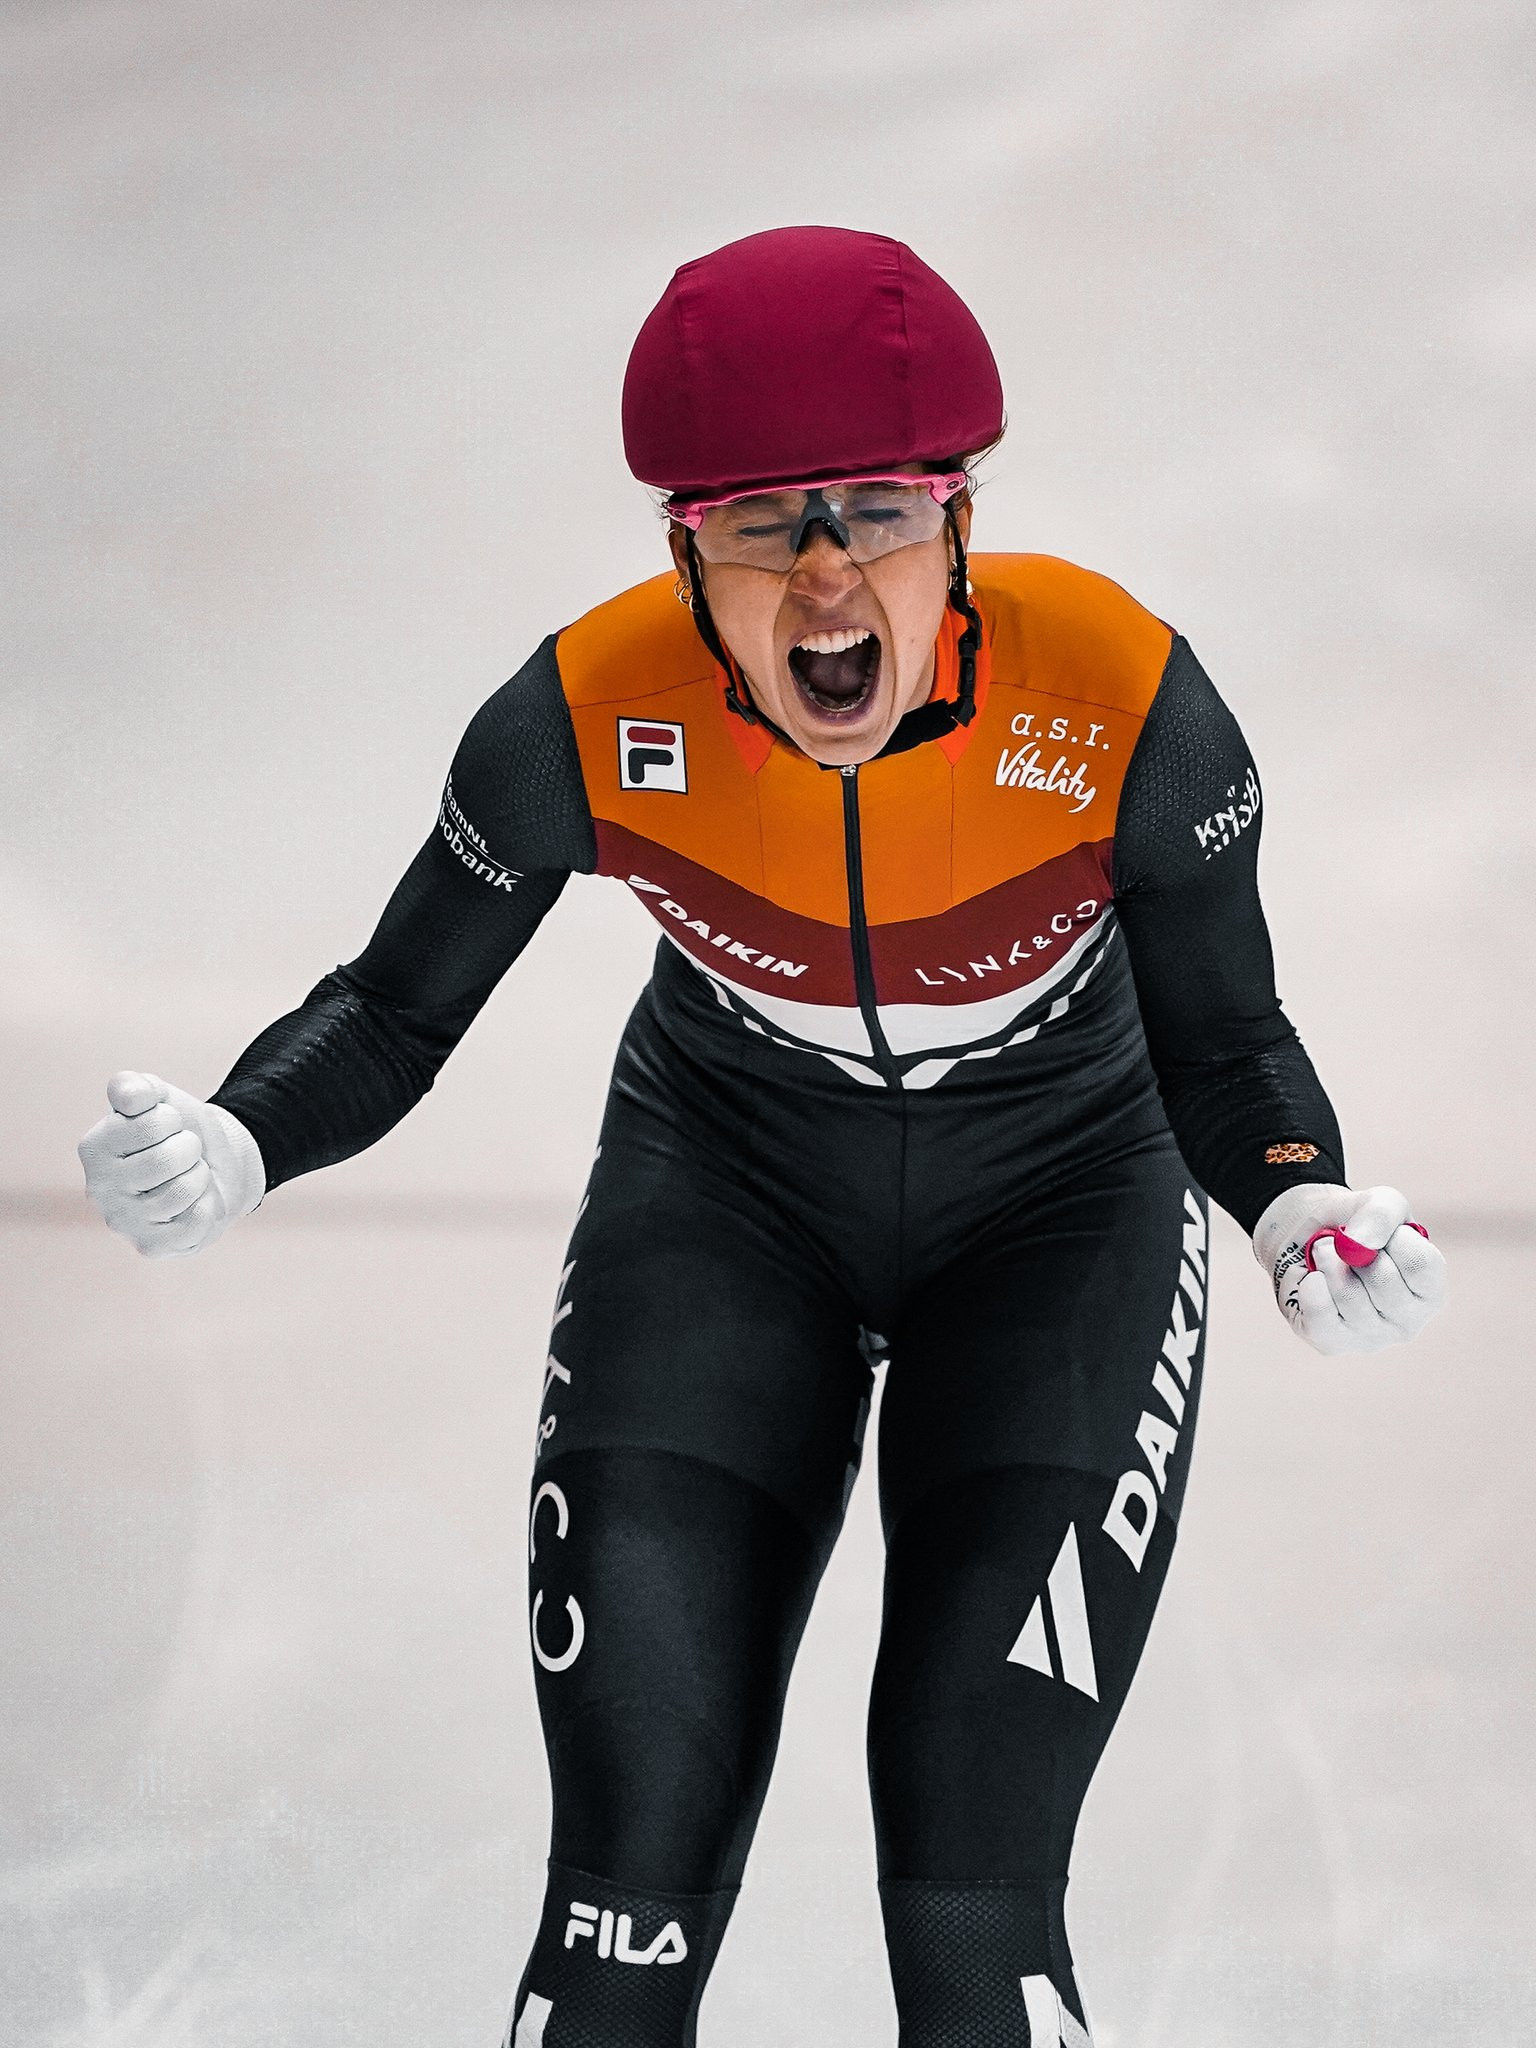 Schulting and Elistratov win overall titles at European Short Track Championships